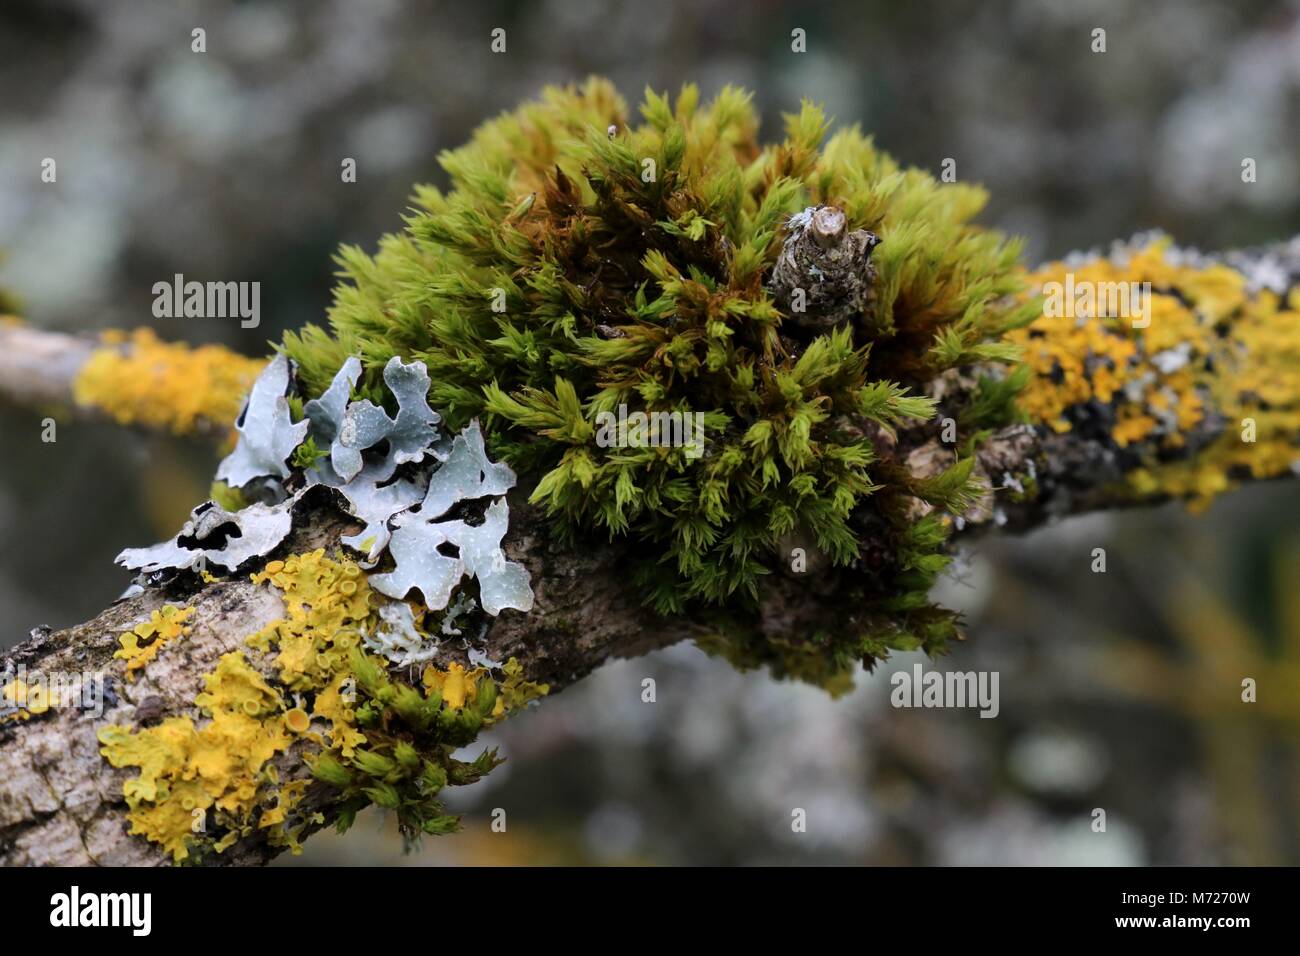 Close up of moss and lichen growing on a twig Stock Photo